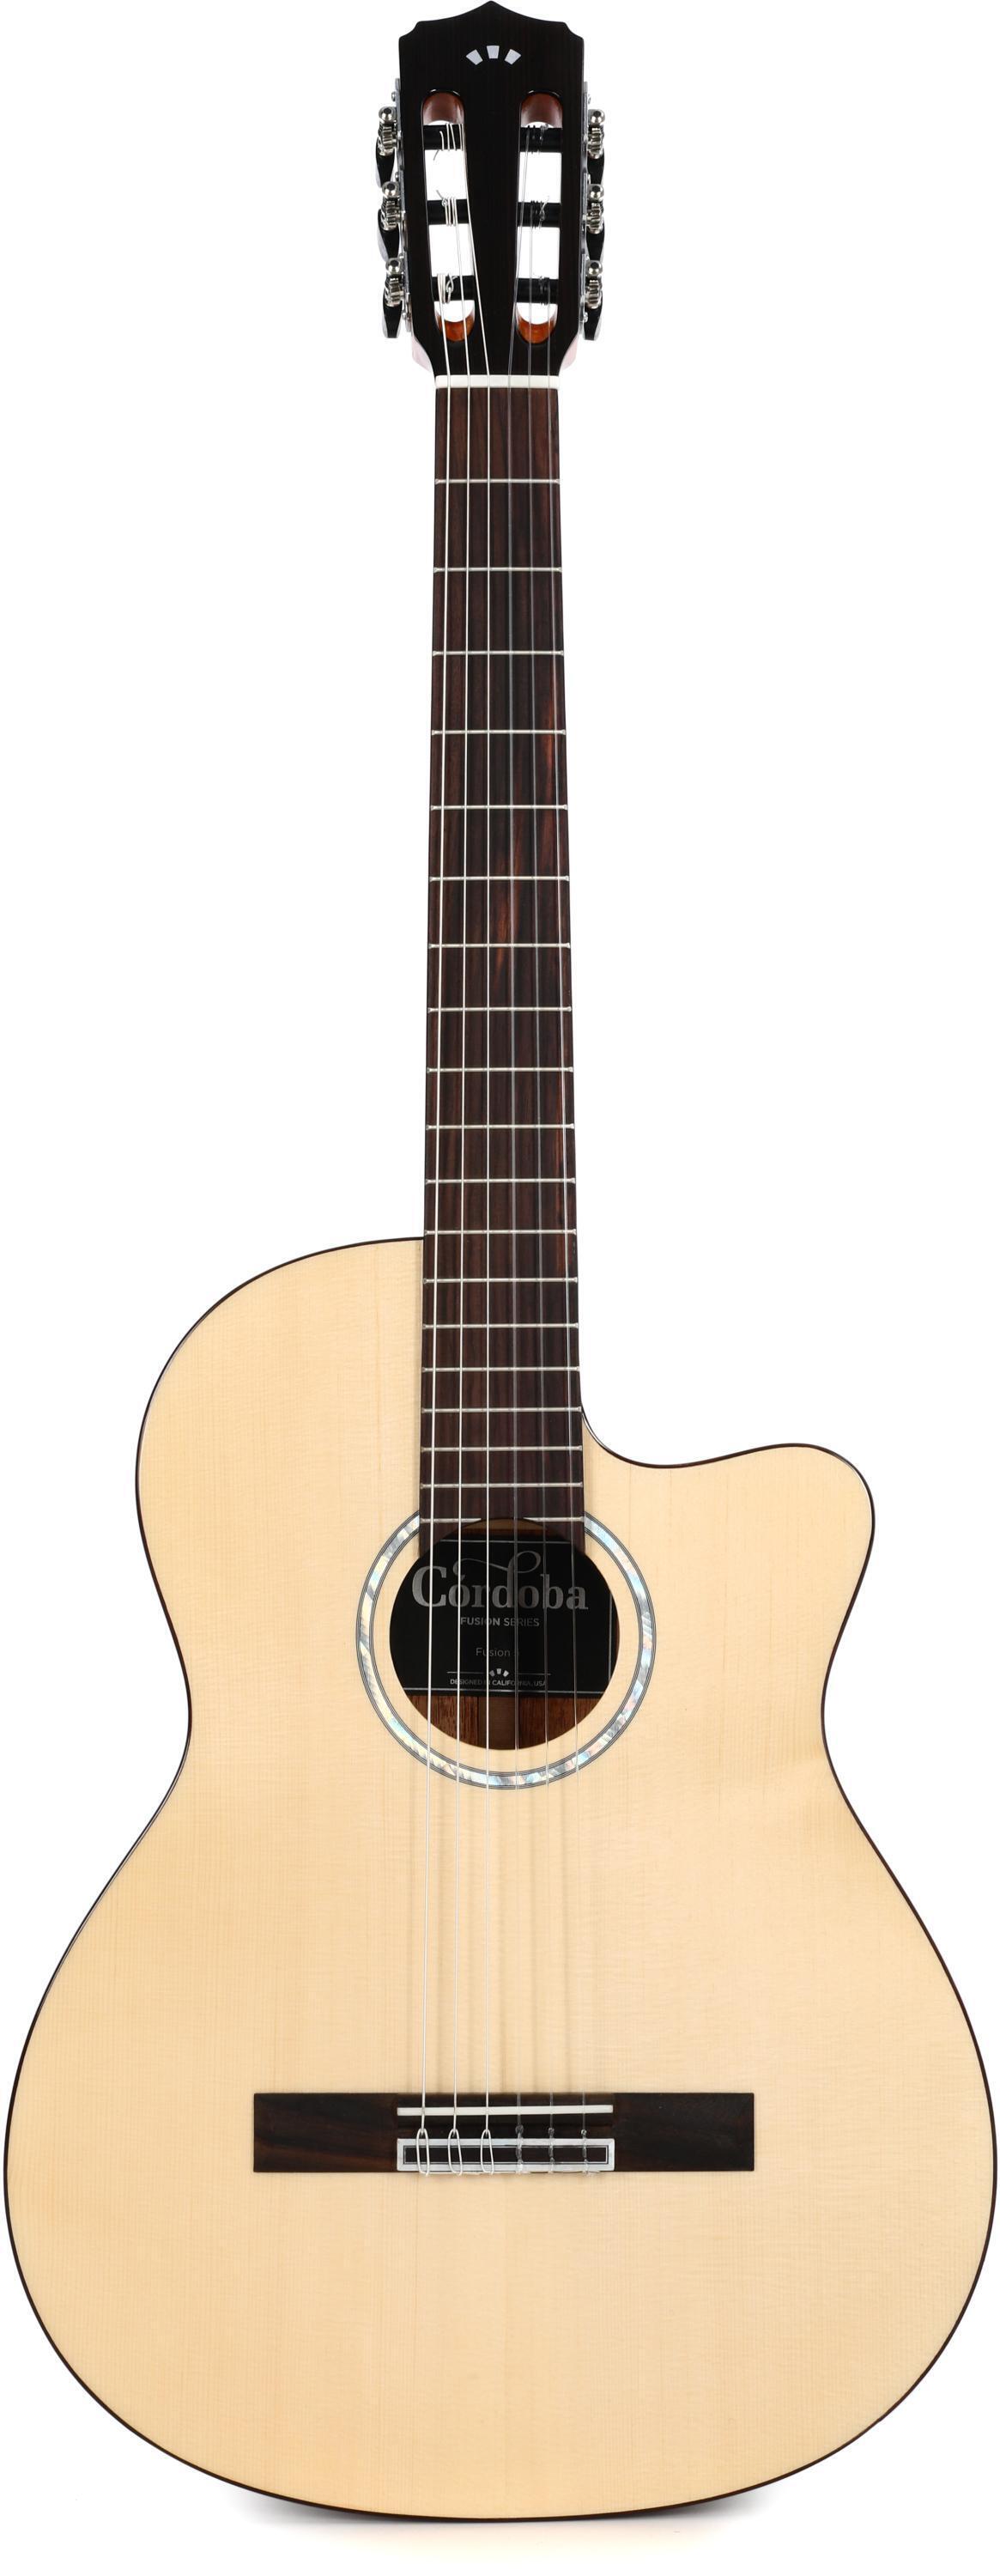 Review: Córdoba Fusion 5 is a Crossover Acoustic-Electric Nylon-String That  Won't Break the Bank